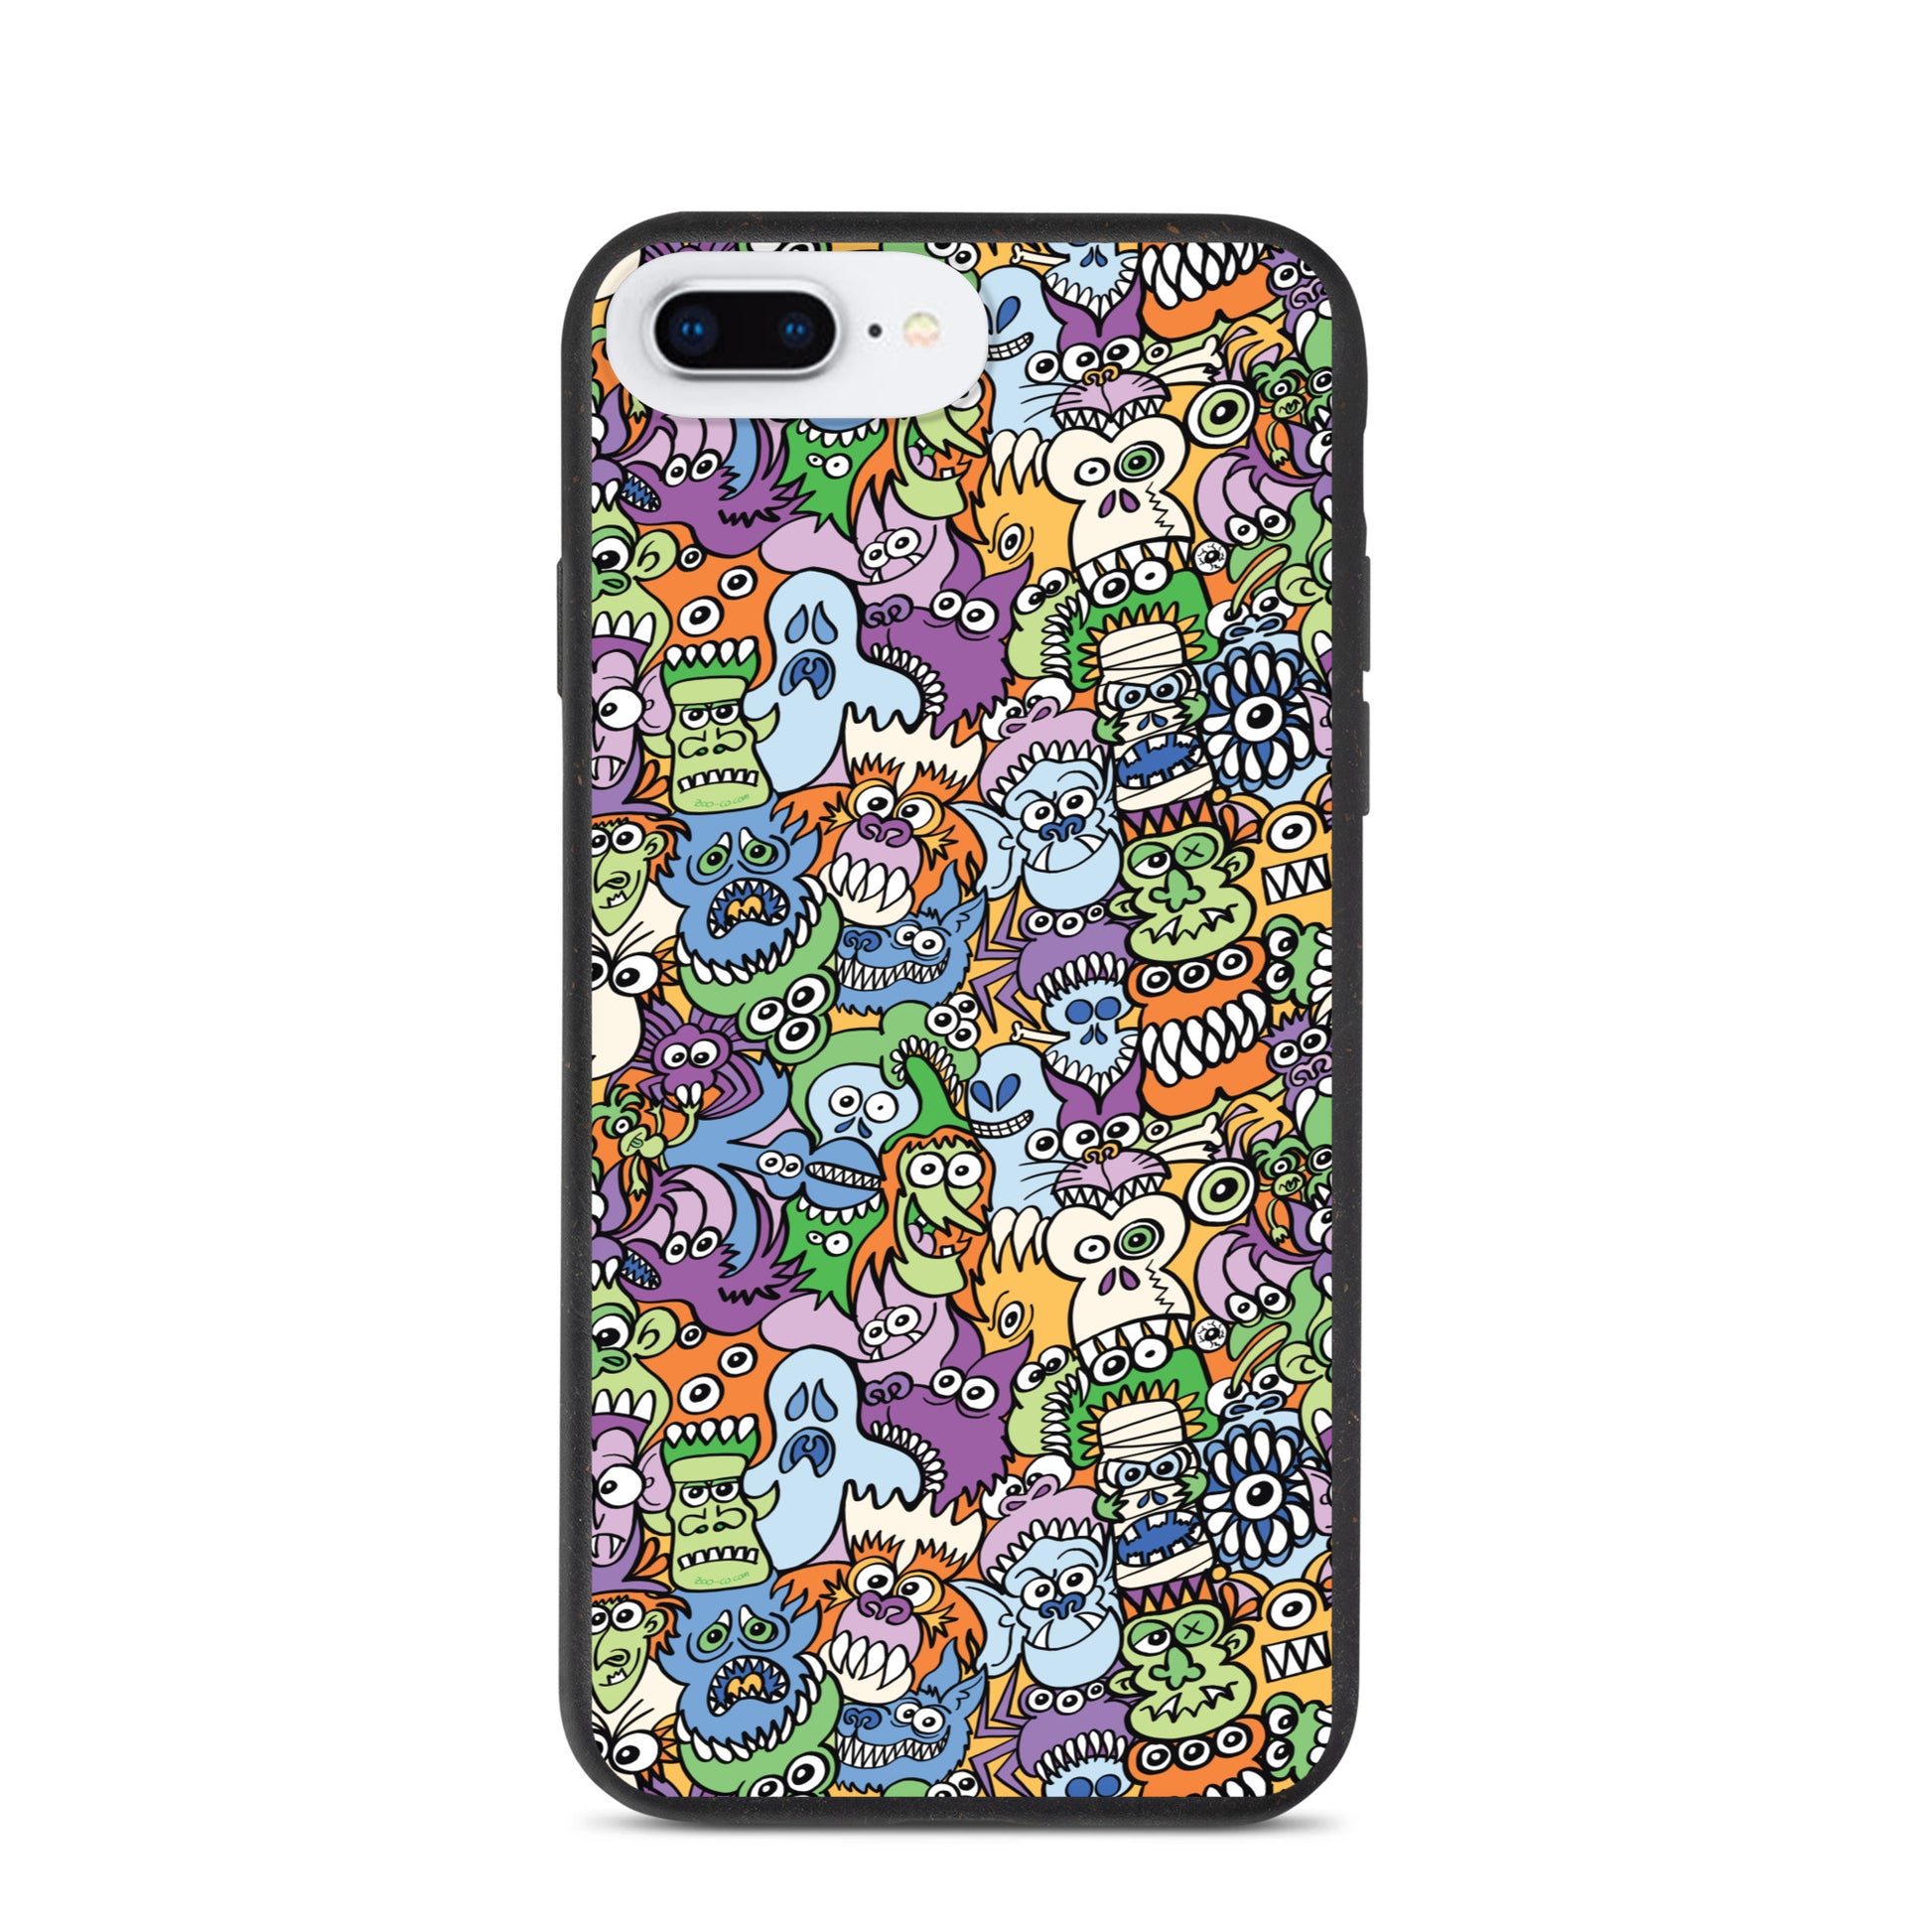 All the spooky Halloween monsters in a pattern design Speckled iPhone case. iphone 7 plus. iphone 8 plus